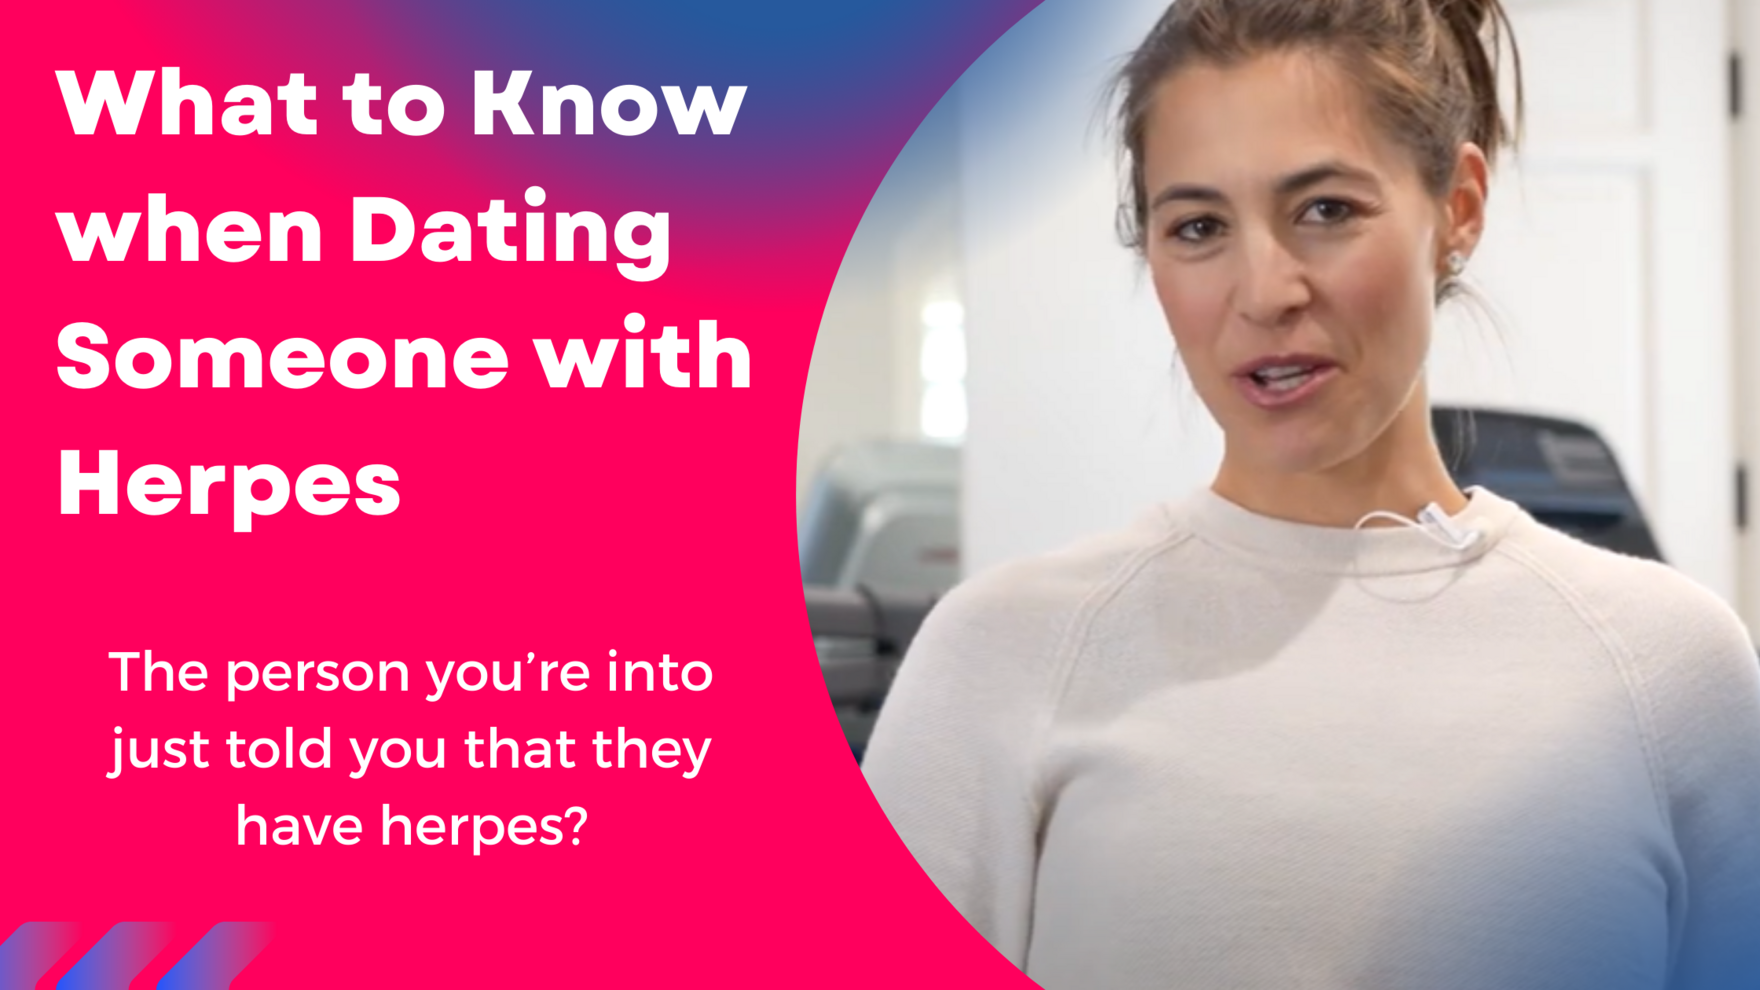 What to Know when Dating Someone with Herpes (Blog Banner)